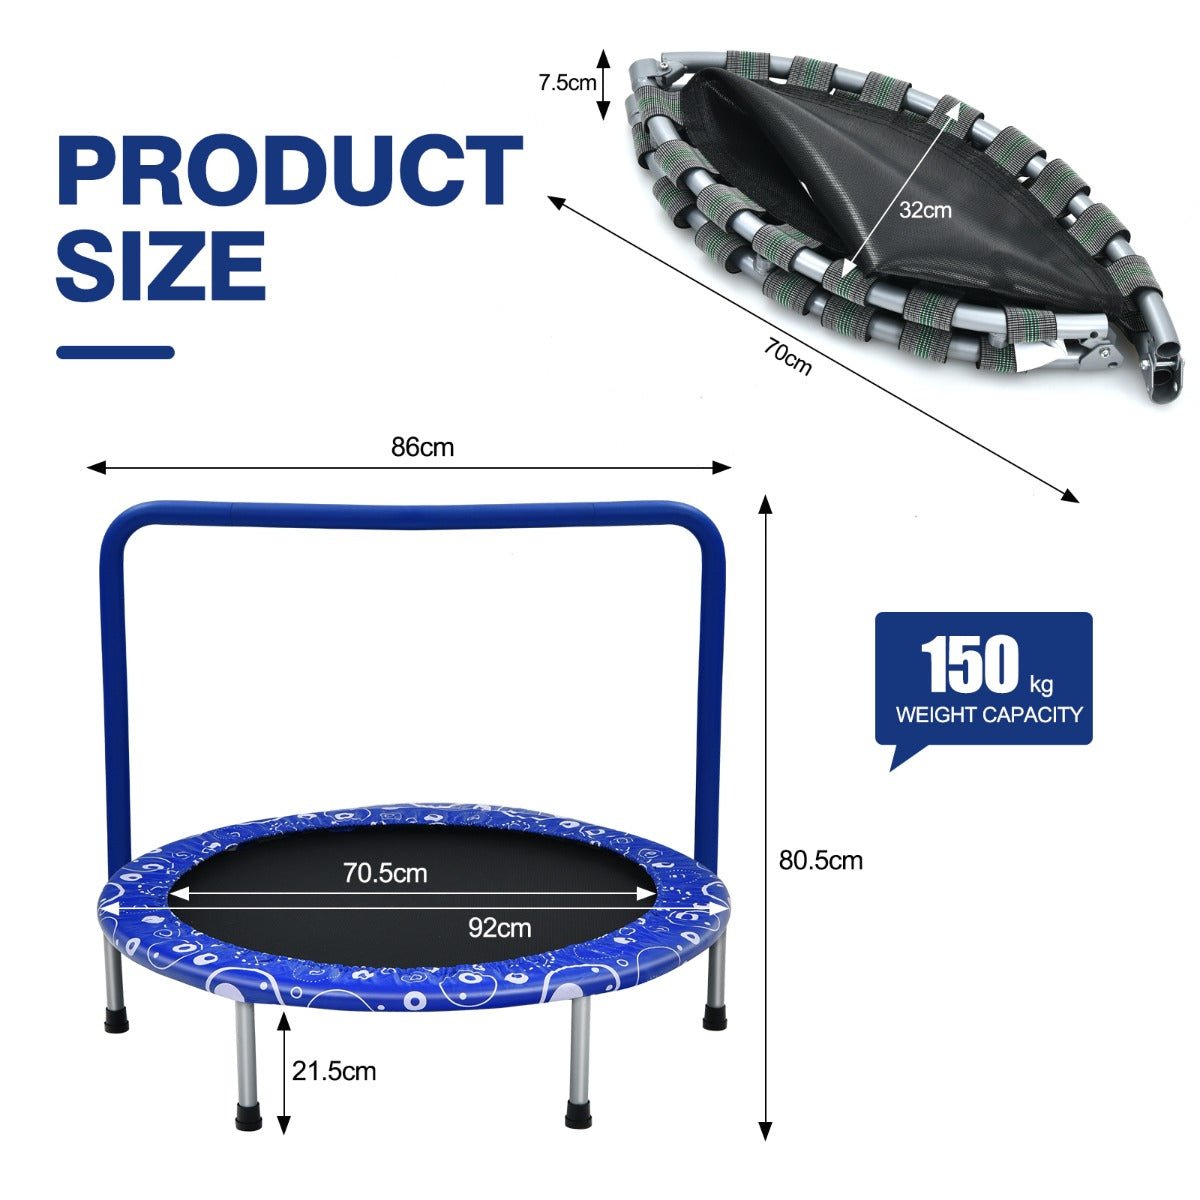 Active Fun: Foldable Kids Trampoline with Handle for Indoor & Outdoor-Blue